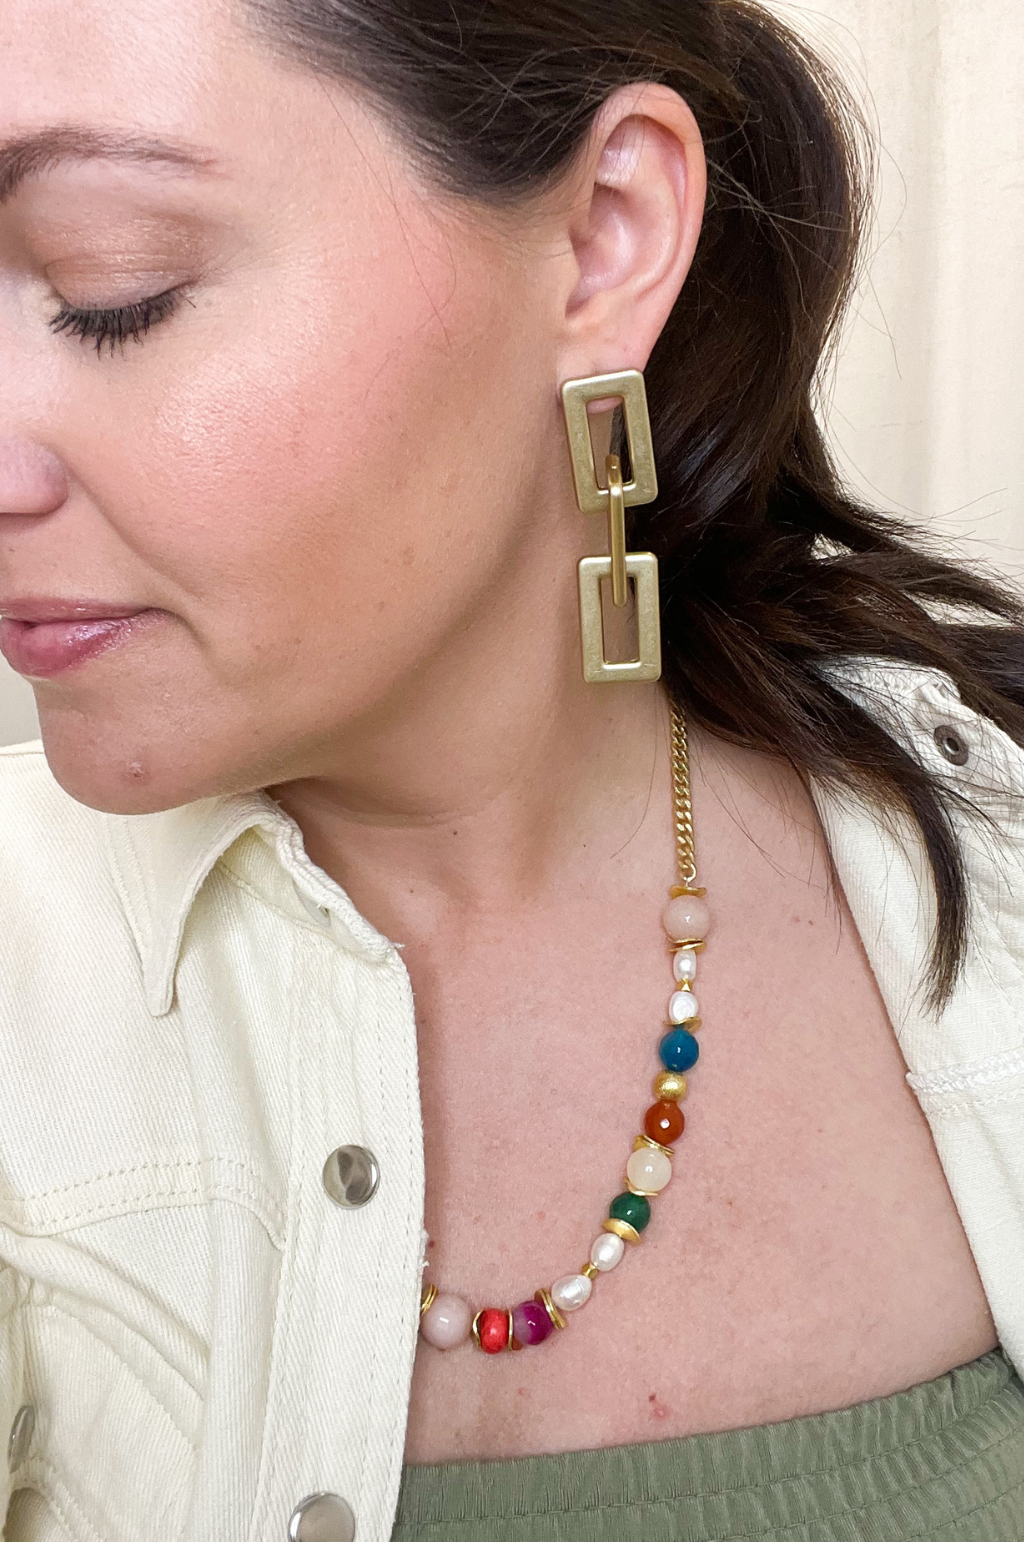 Little Linked Up Earrings by Annie Claire Designs - SoSis